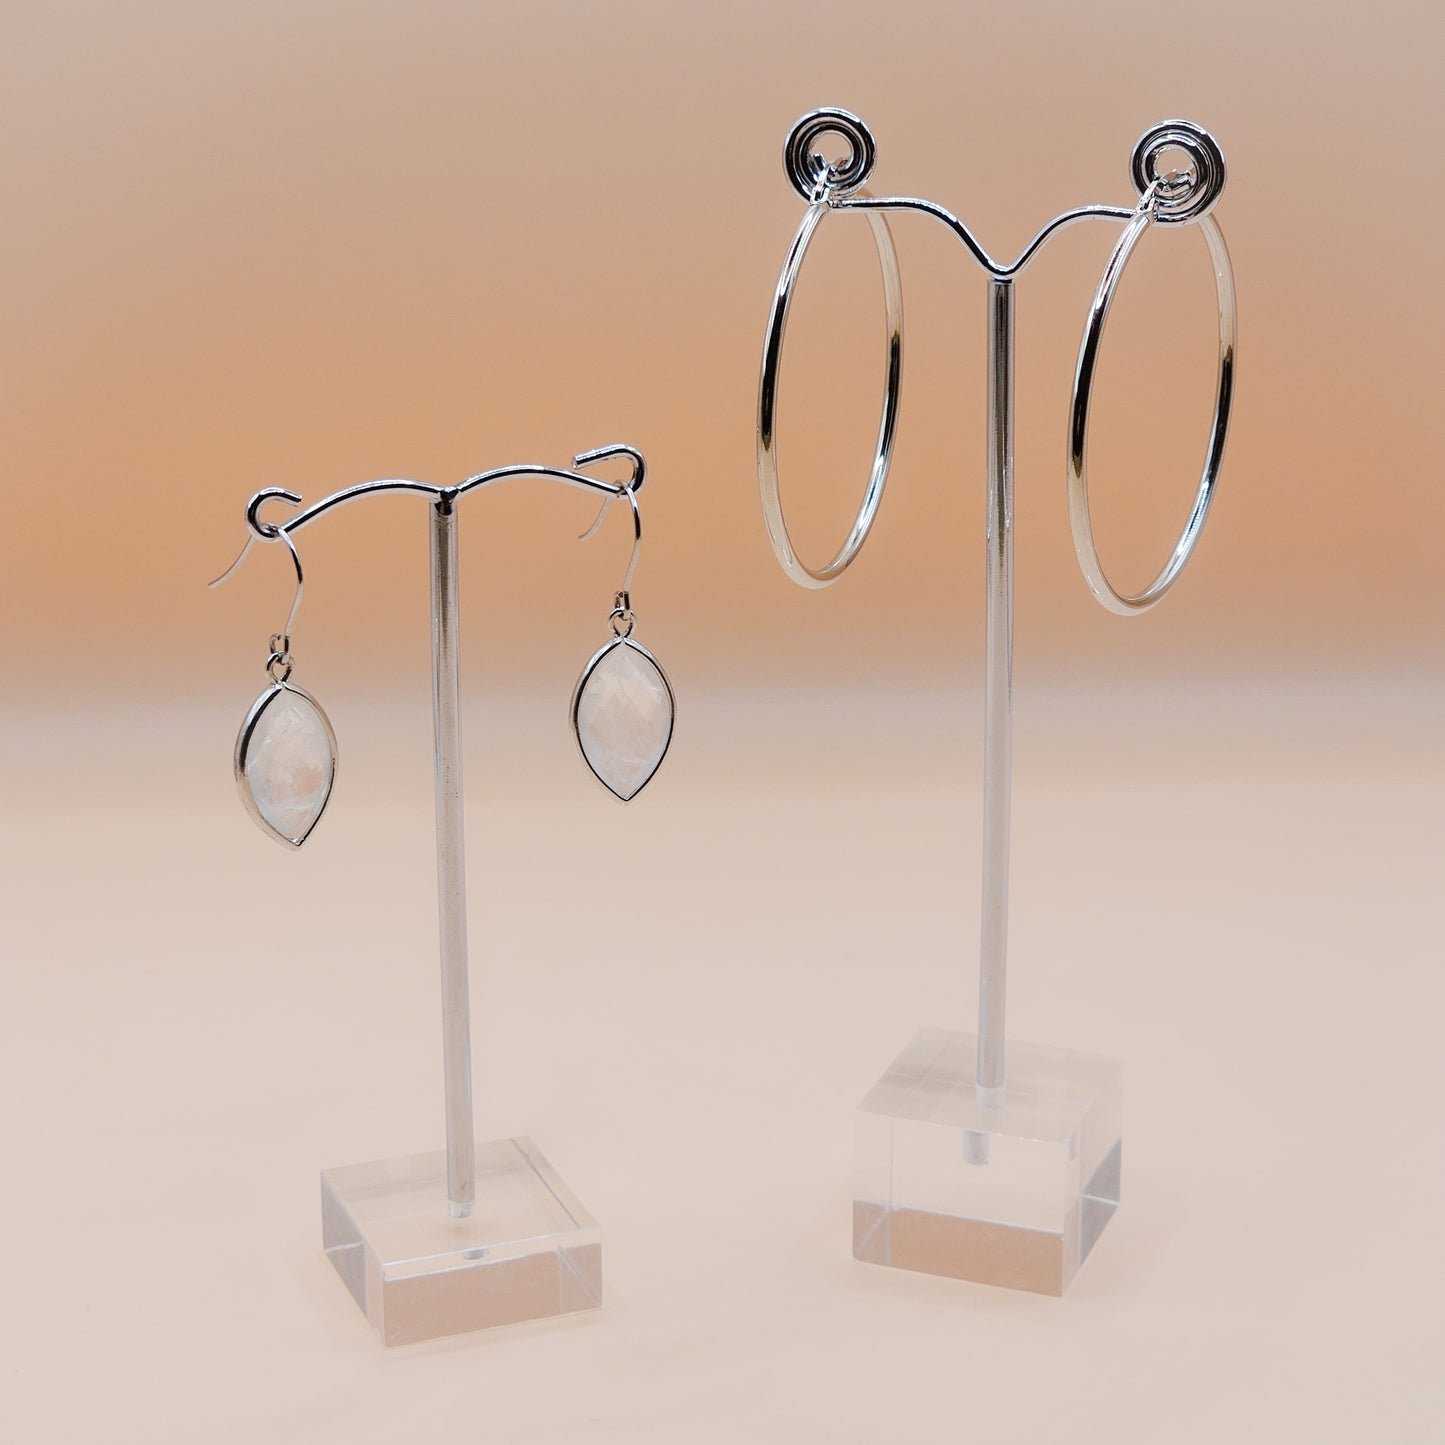 Perspex Acrylic Metal T-Bar Earring Display Stand | earring display pack | shop displays, carft market stall  jewellery display stands